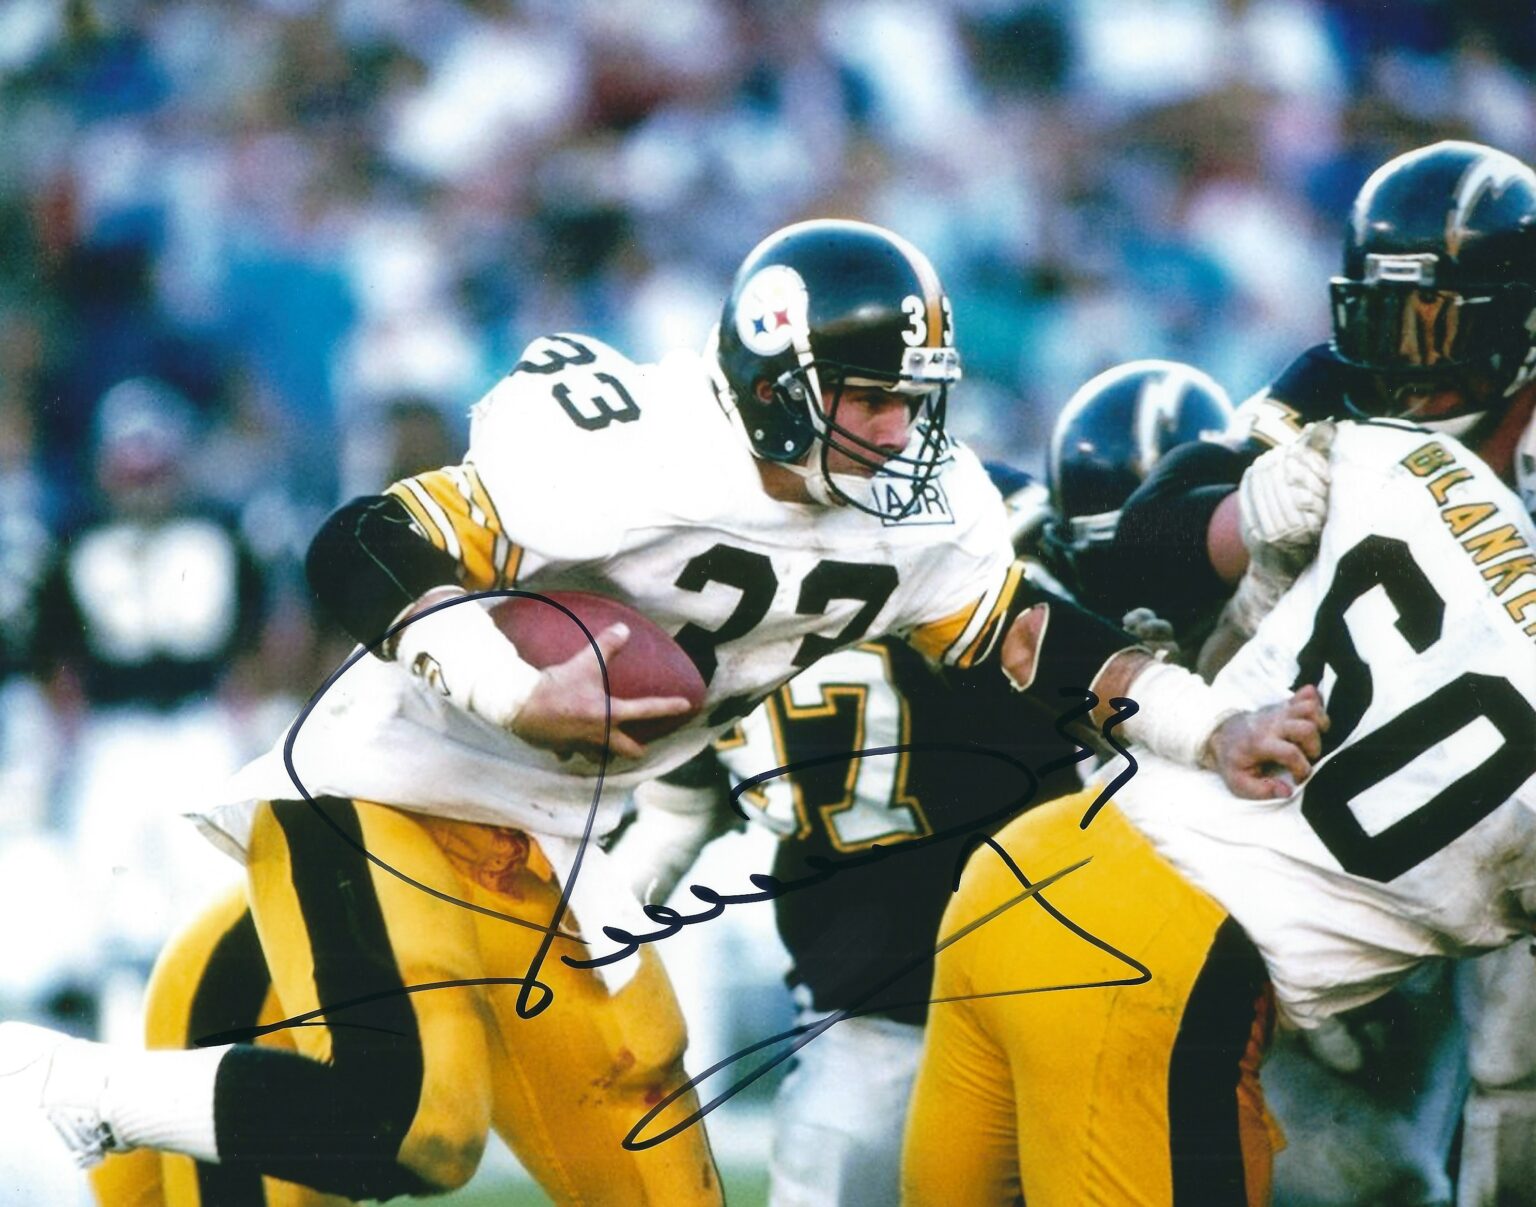 Autographed Steelers Photos Archives Page 5 of 10 Main Line Autographs